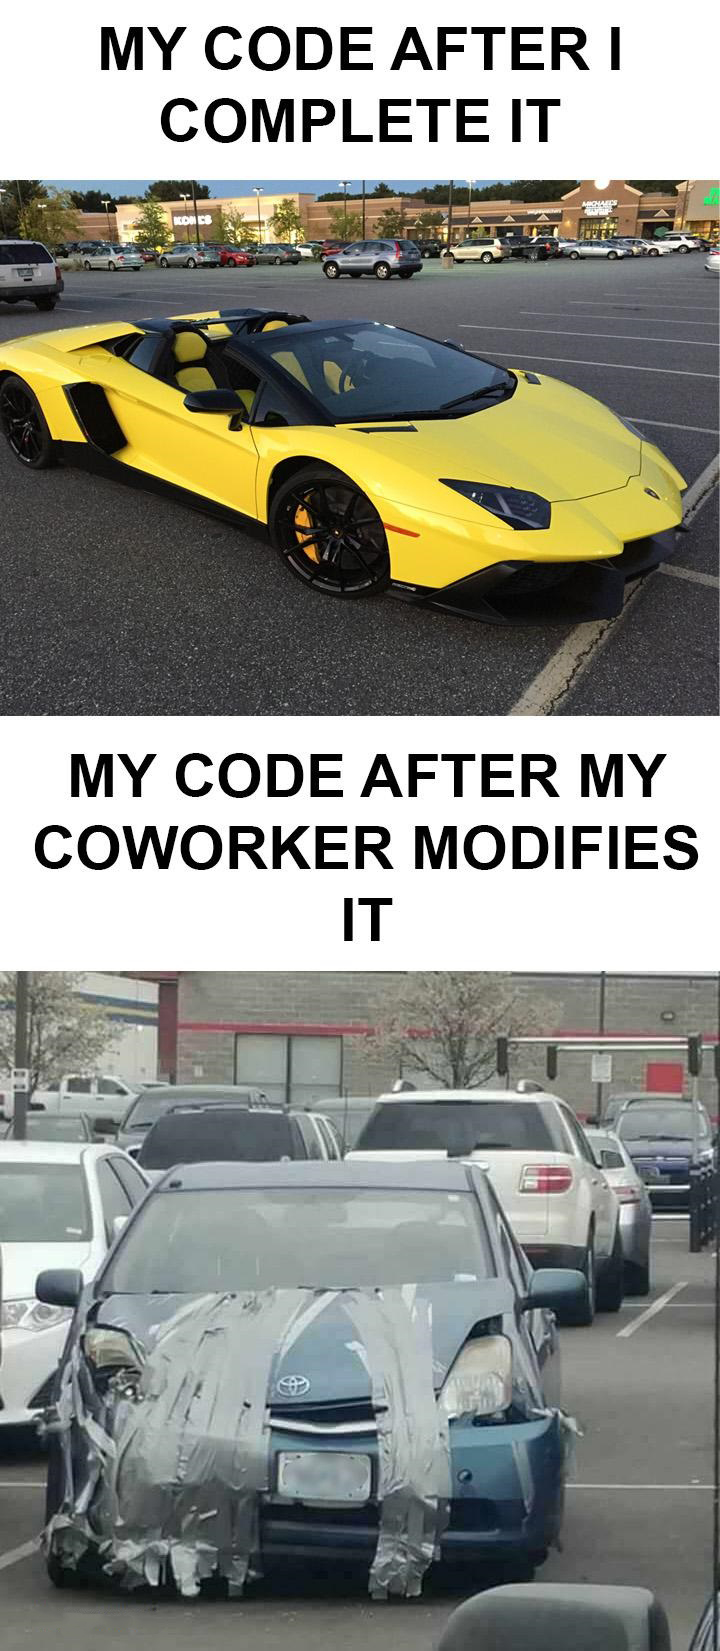 duct tape fix car - My Code Afteri Complete It My Code After My Coworker Modifies It